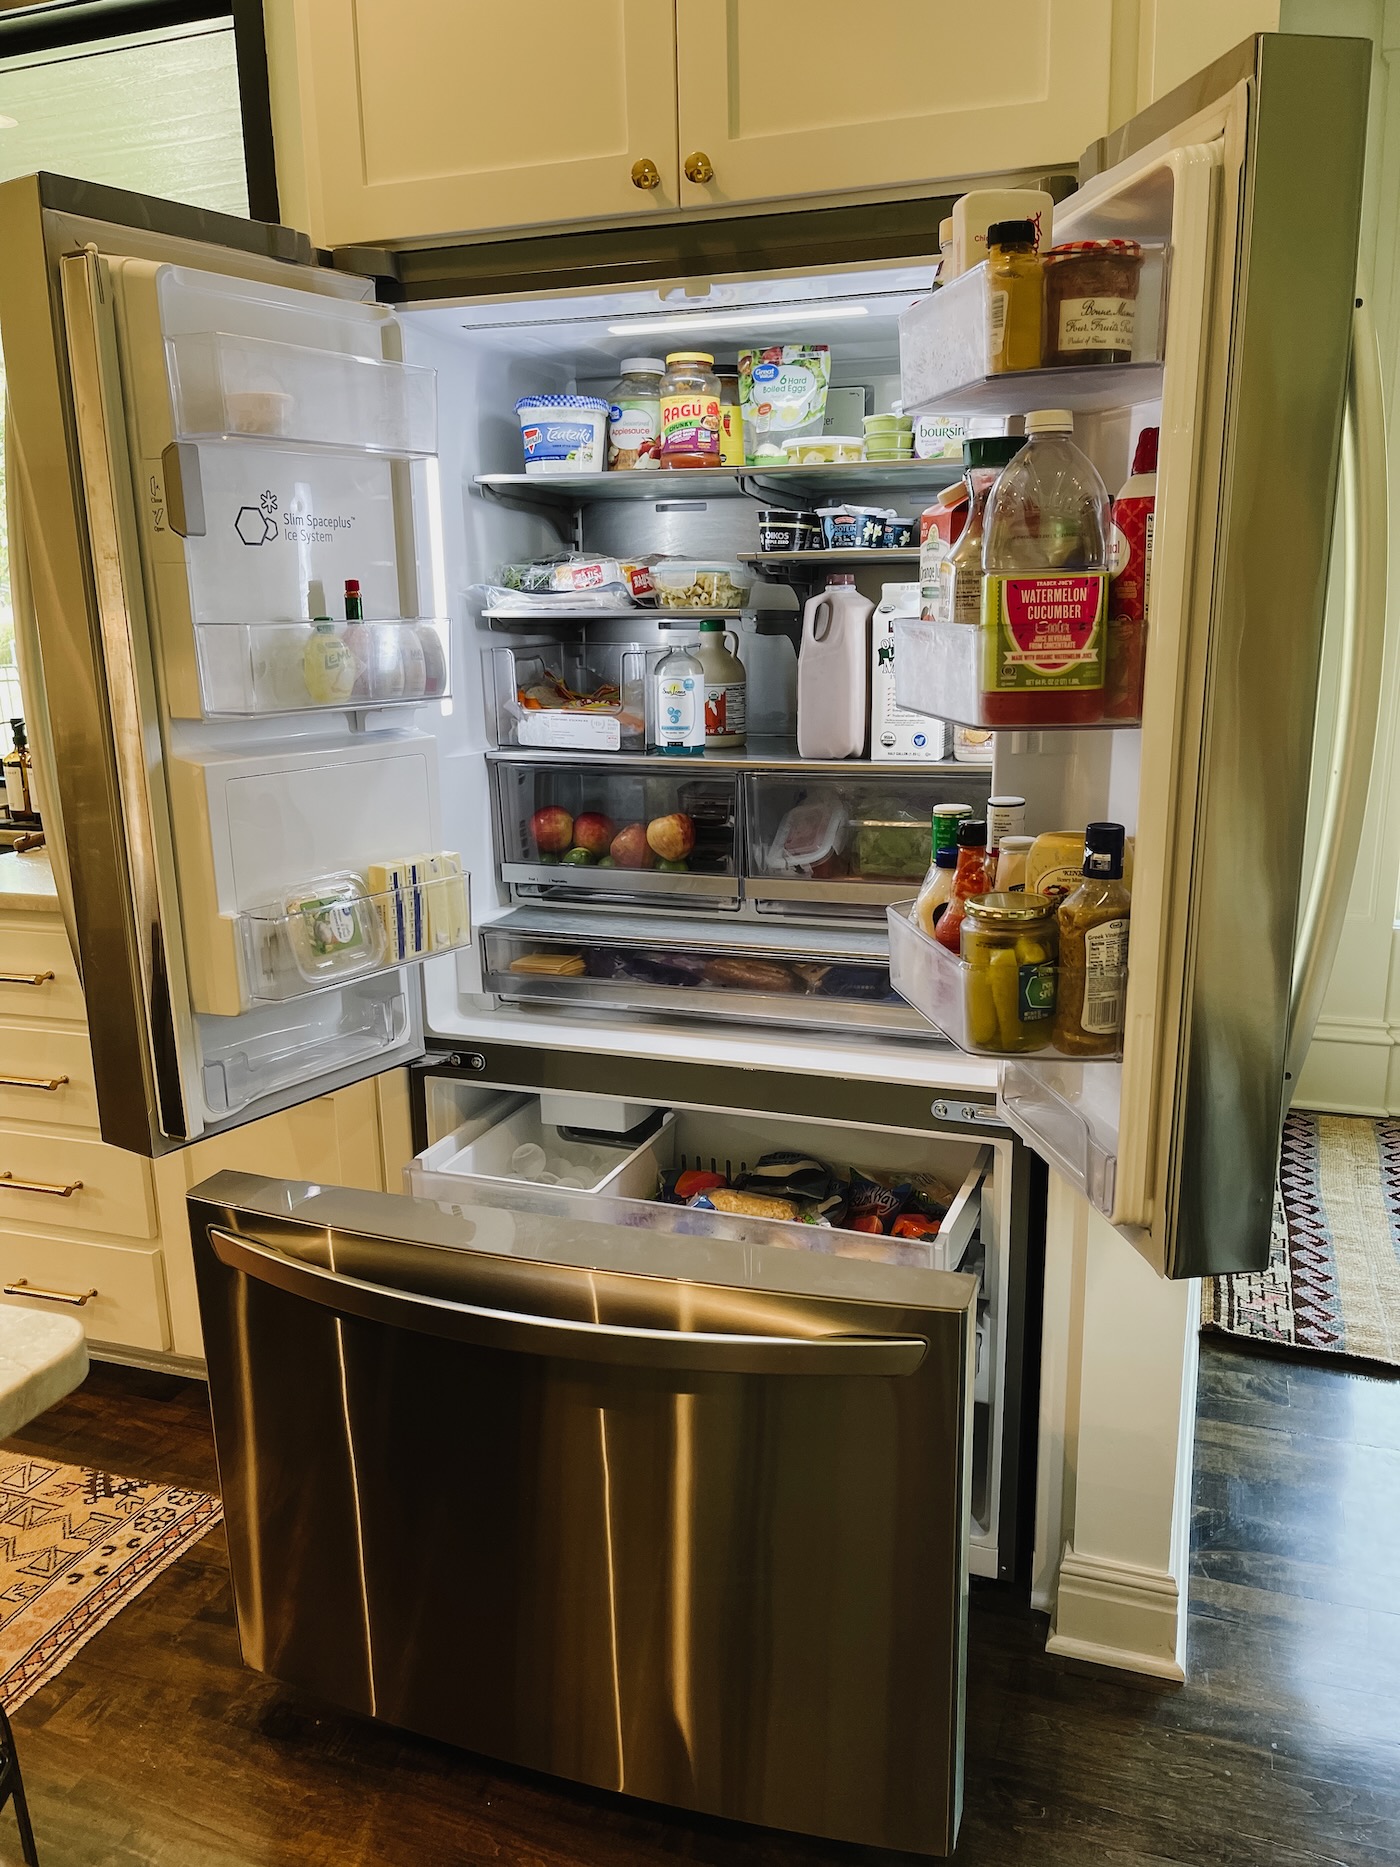 Can I Keep My Fridge/Freezer in the Garage Safely?